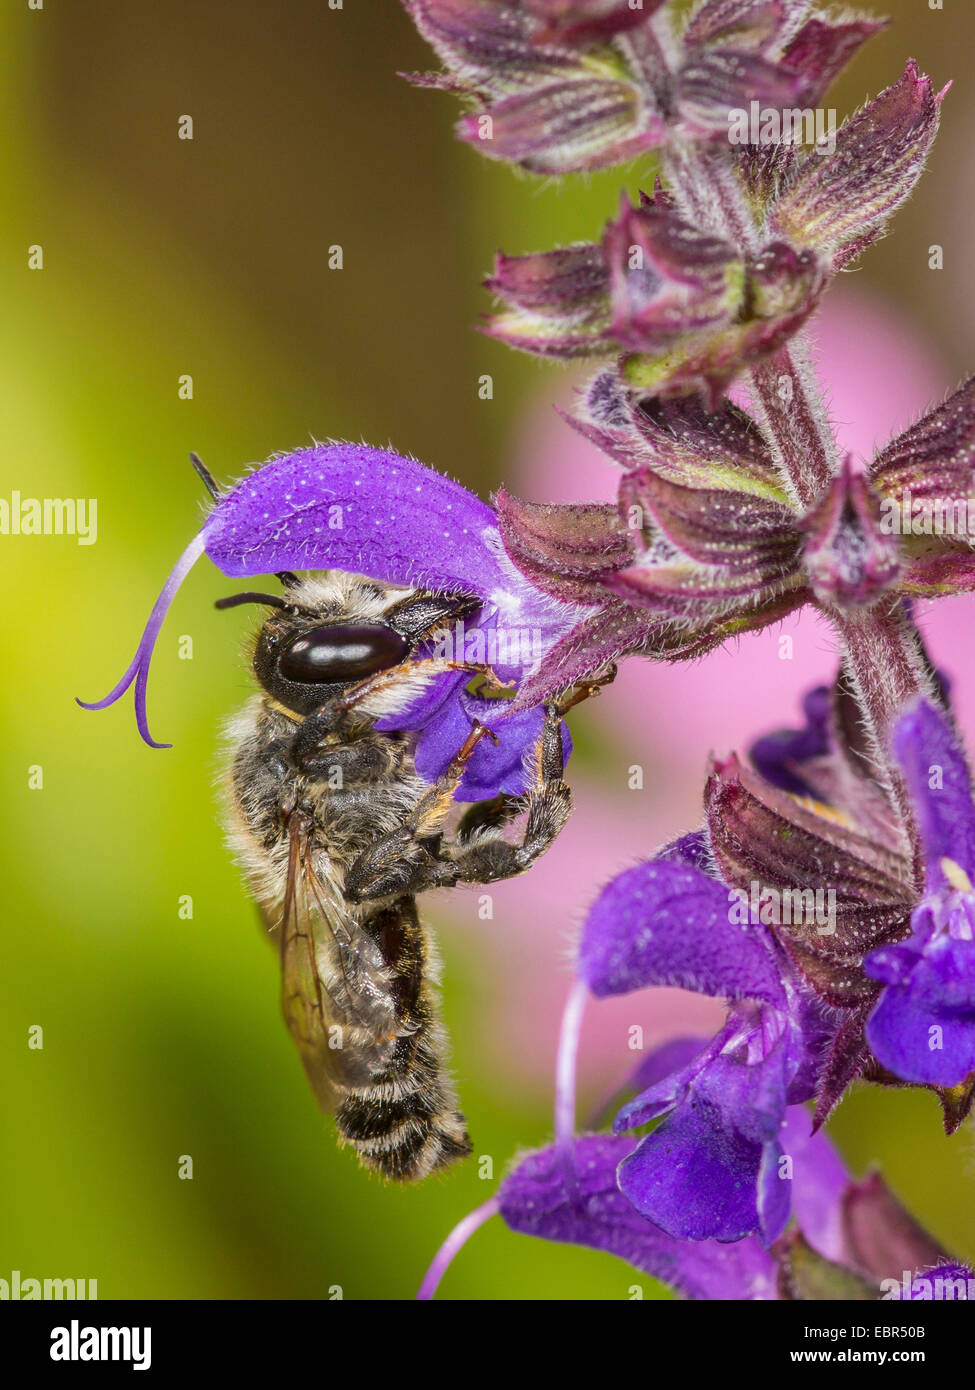 Leafcutter bee, Leafcutter-bee (Megachile ericetorum, Chalicodoma ericetorum, Pseudomegachile ericetorum), male foraging on Sage (Salvia), Germany Stock Photo